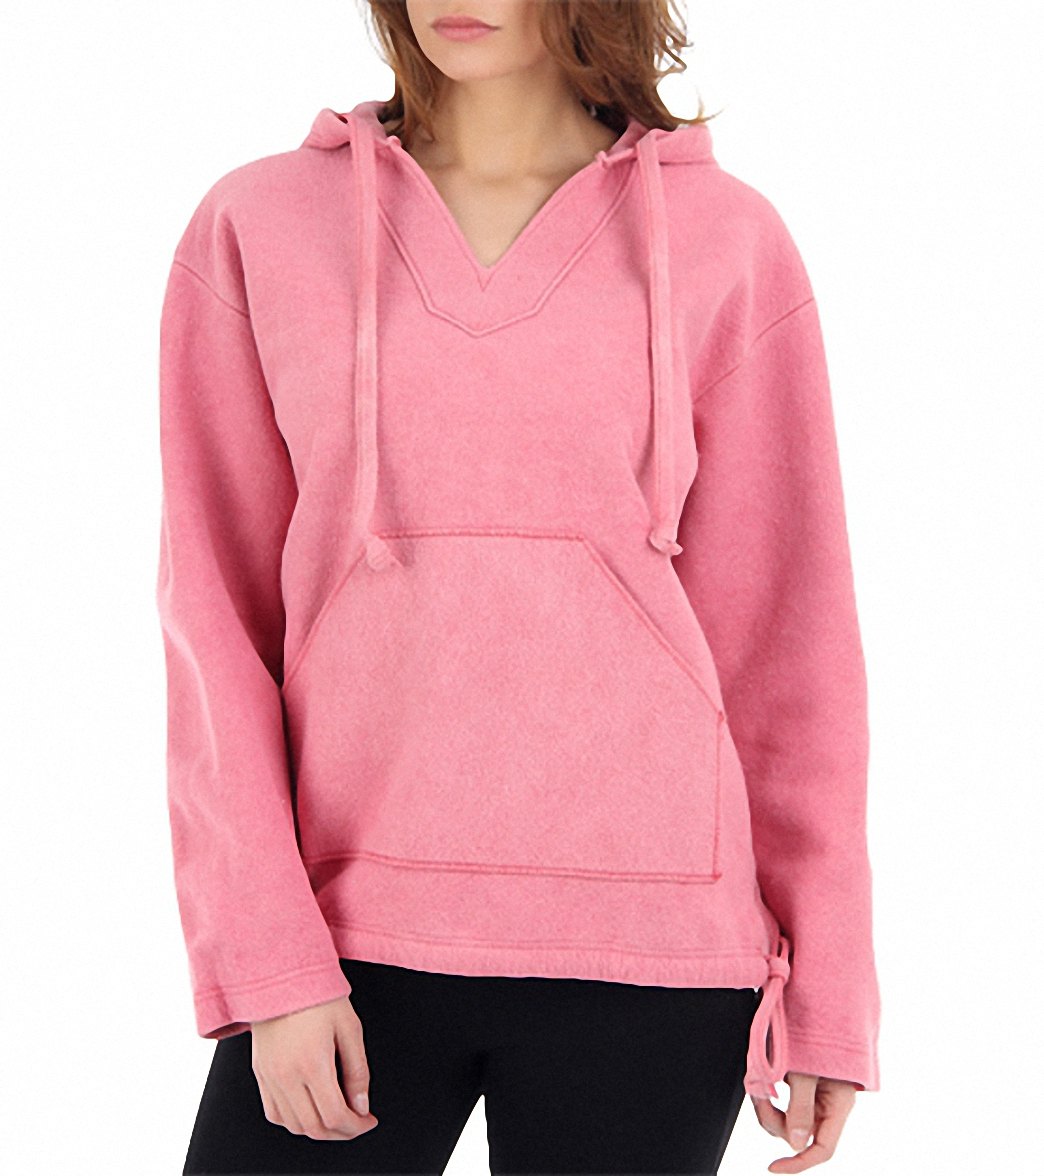 Chammyz Classic Pullover at SwimOutlet.com - Free Shipping